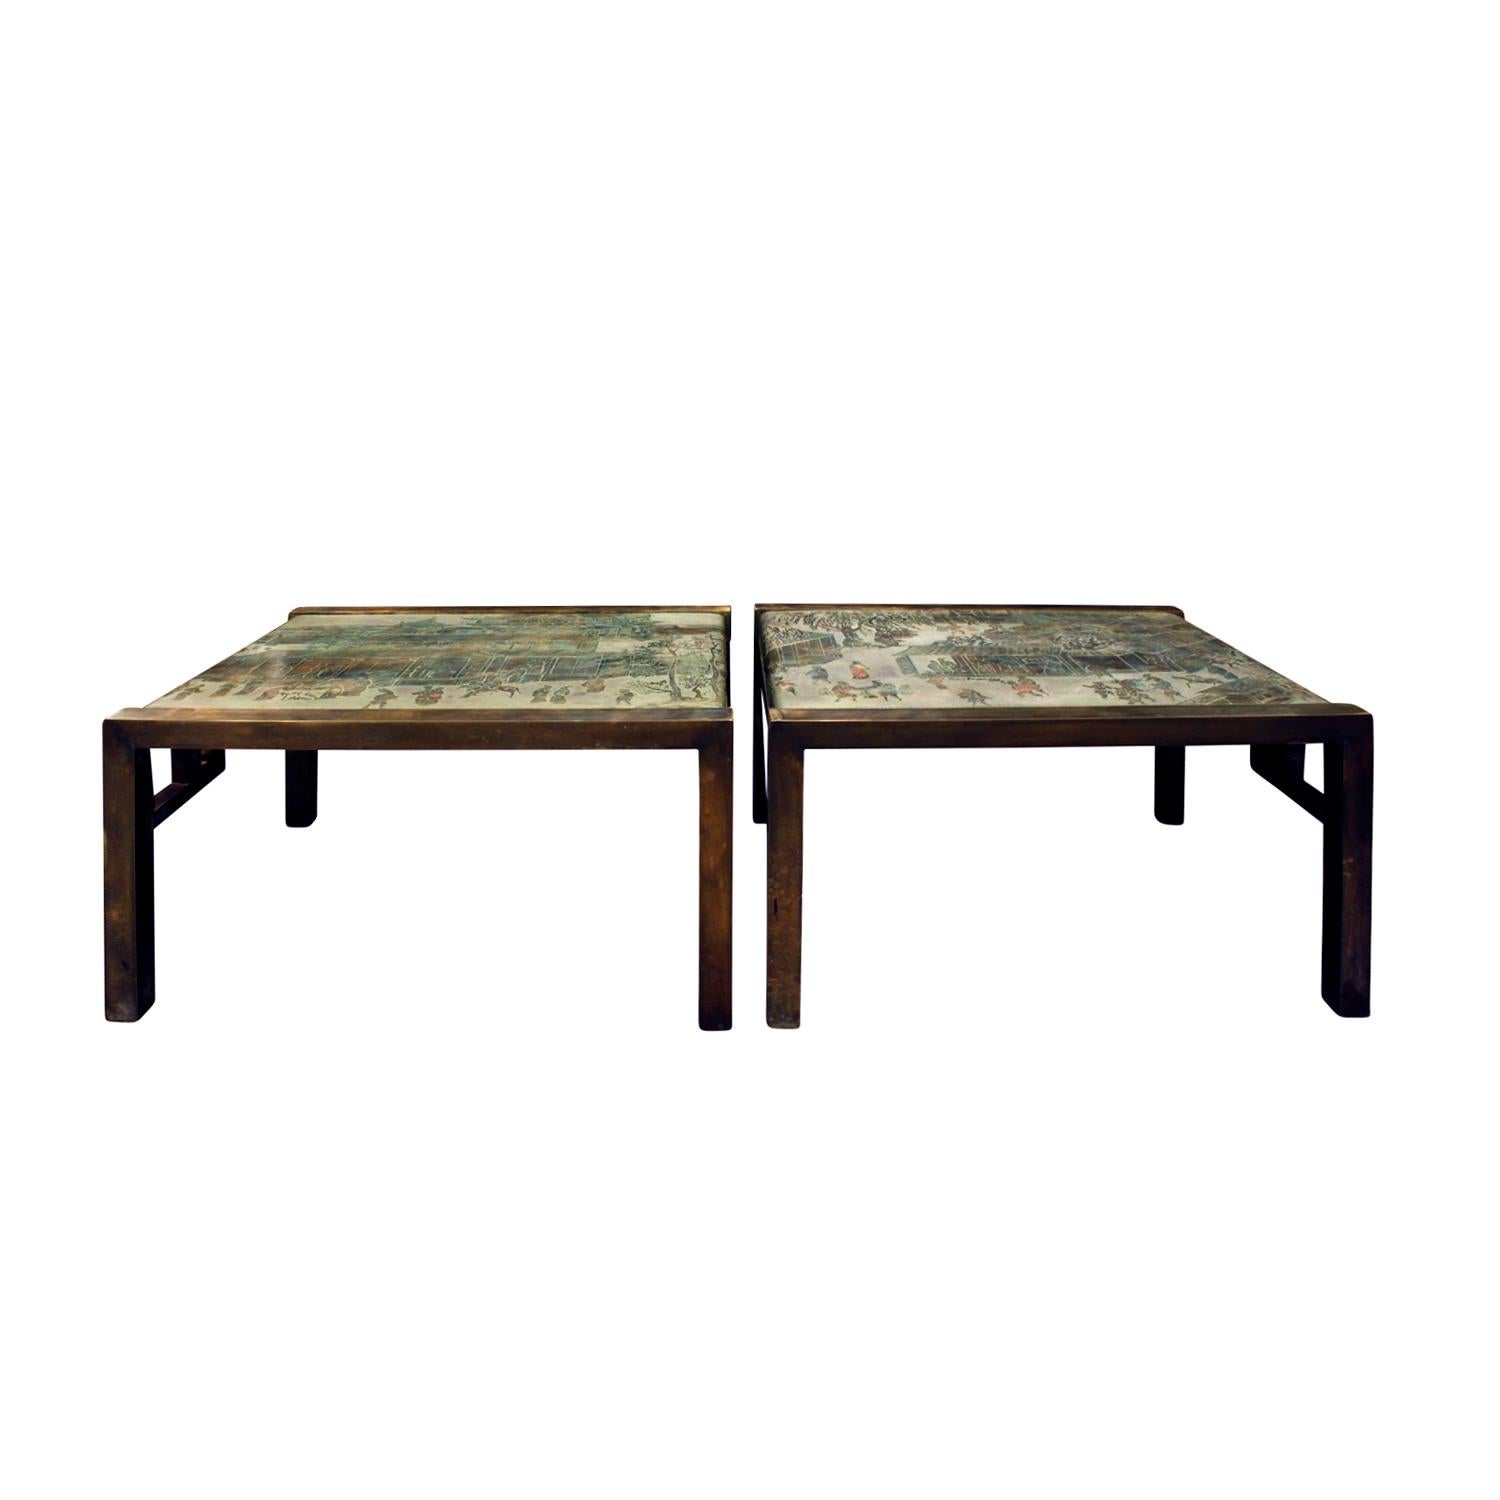 Rare pair of “Special Festival Coffee Tables” in patinated bronze and pewter with painted enamels by Philip & Kelvin LaVerne, American, 1960s. (Signed “Philip and Kelvin LaVerne on both table tops” and “Philip LaVerne Galleries Ltd.” labels on